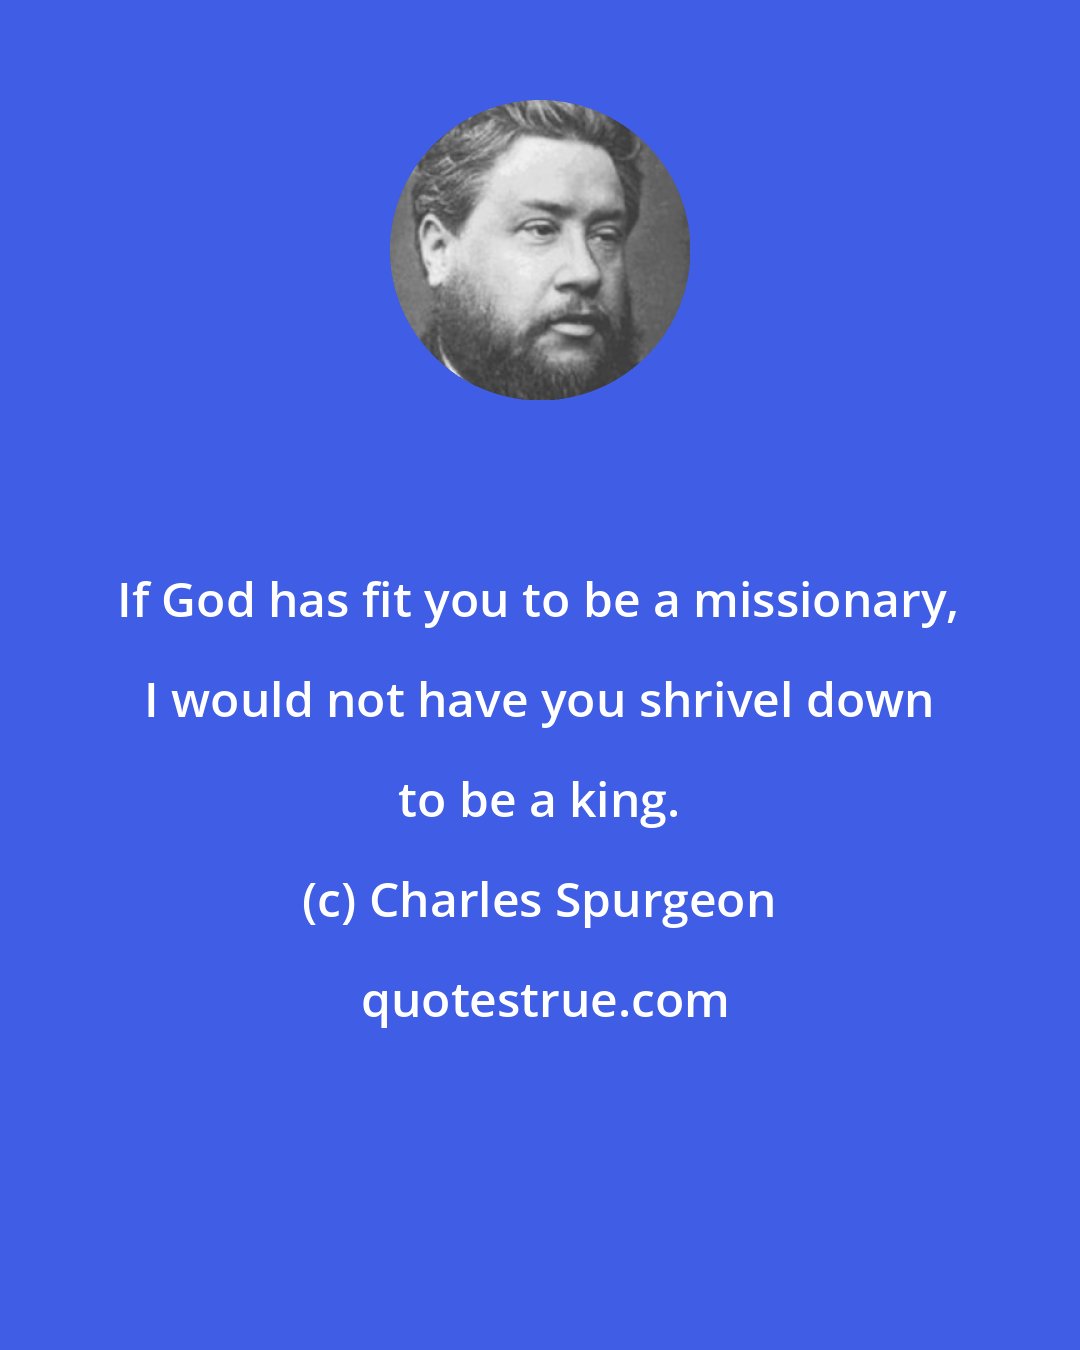 Charles Spurgeon: If God has fit you to be a missionary, I would not have you shrivel down to be a king.